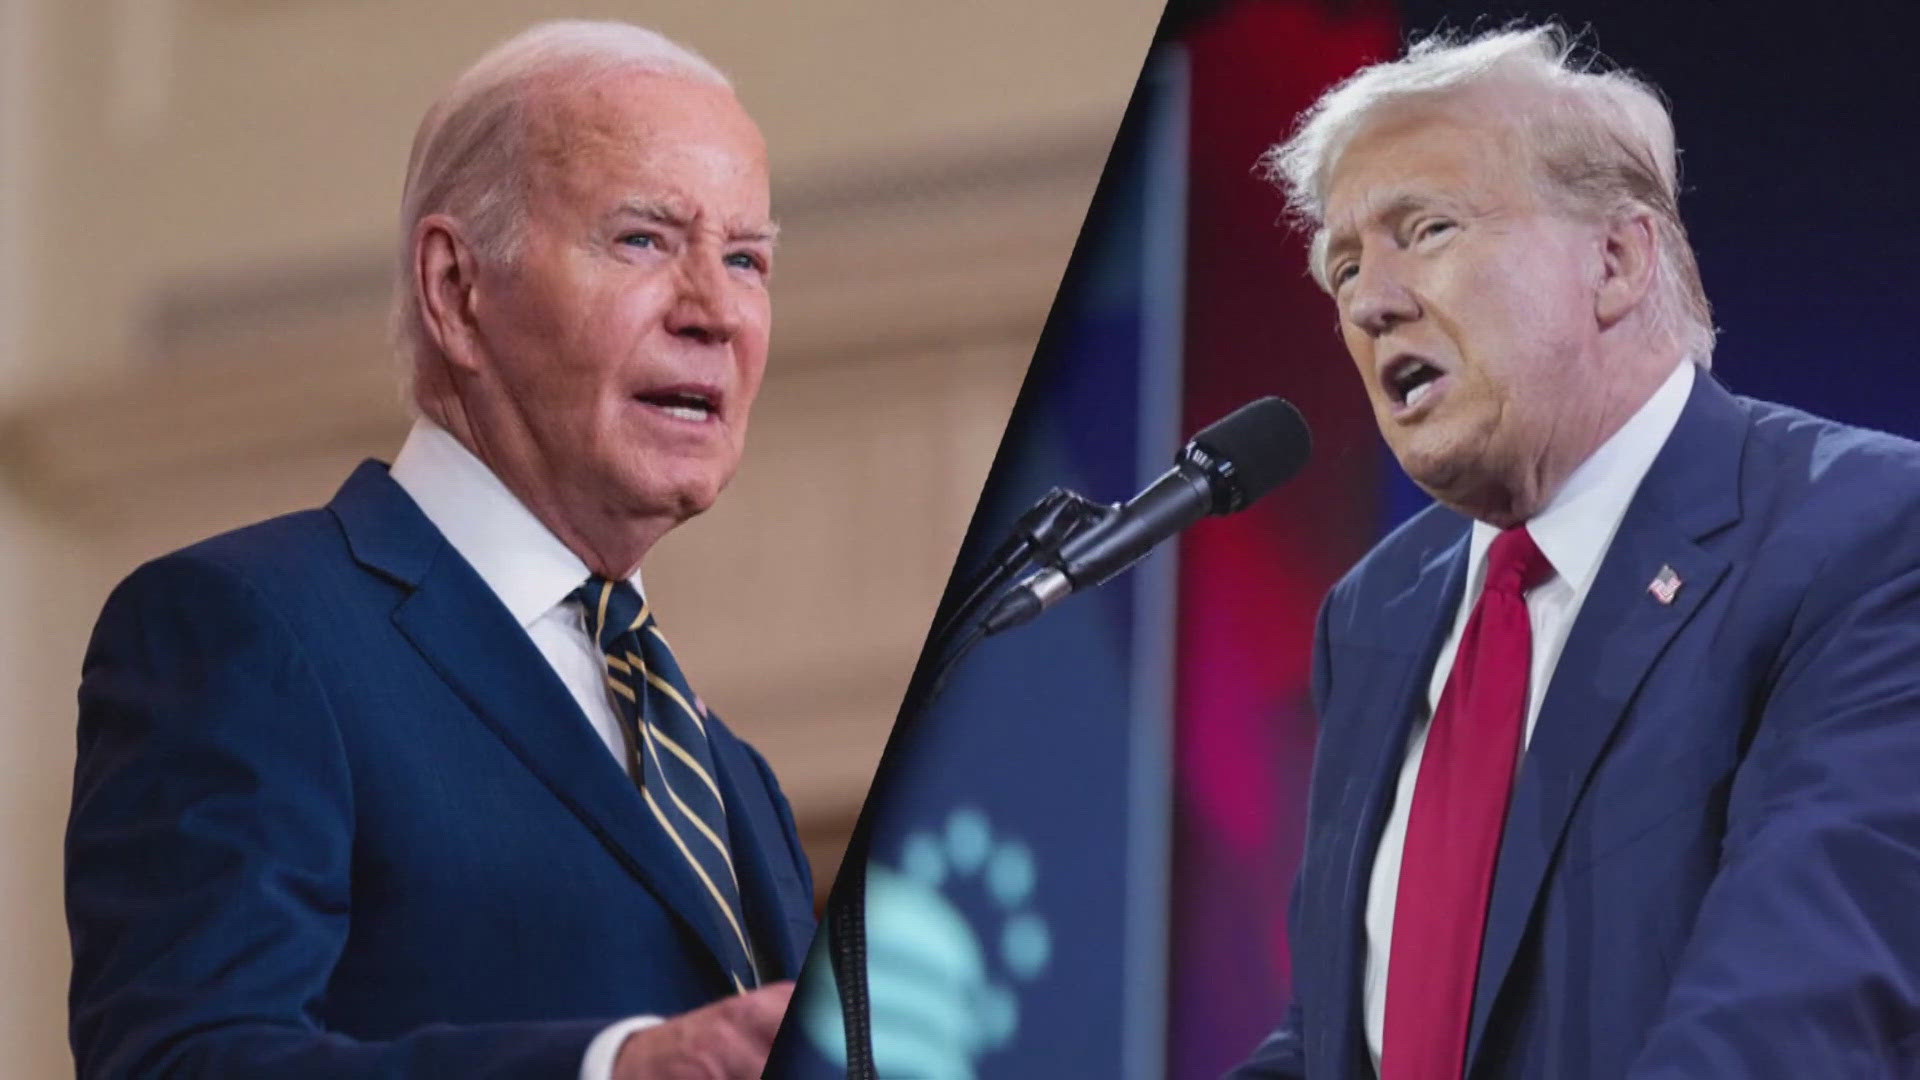 President Joe Biden and his Republican rival, Donald Trump, will meet for a debate on Thursday that offers an unparalleled opportunity for both candidates.